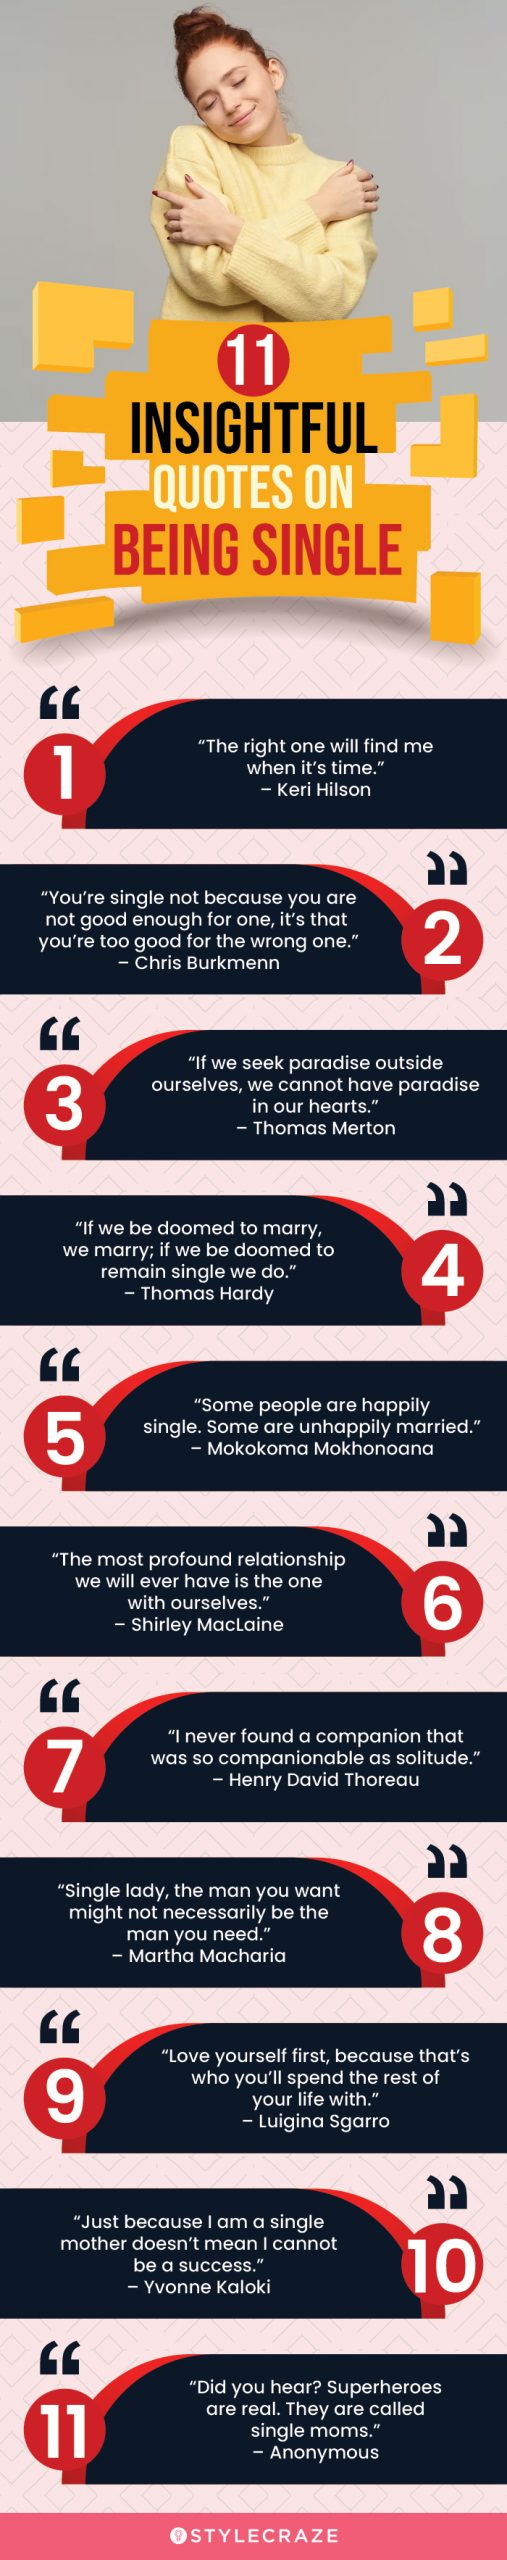 11 insightful quotes on being single (infographic)